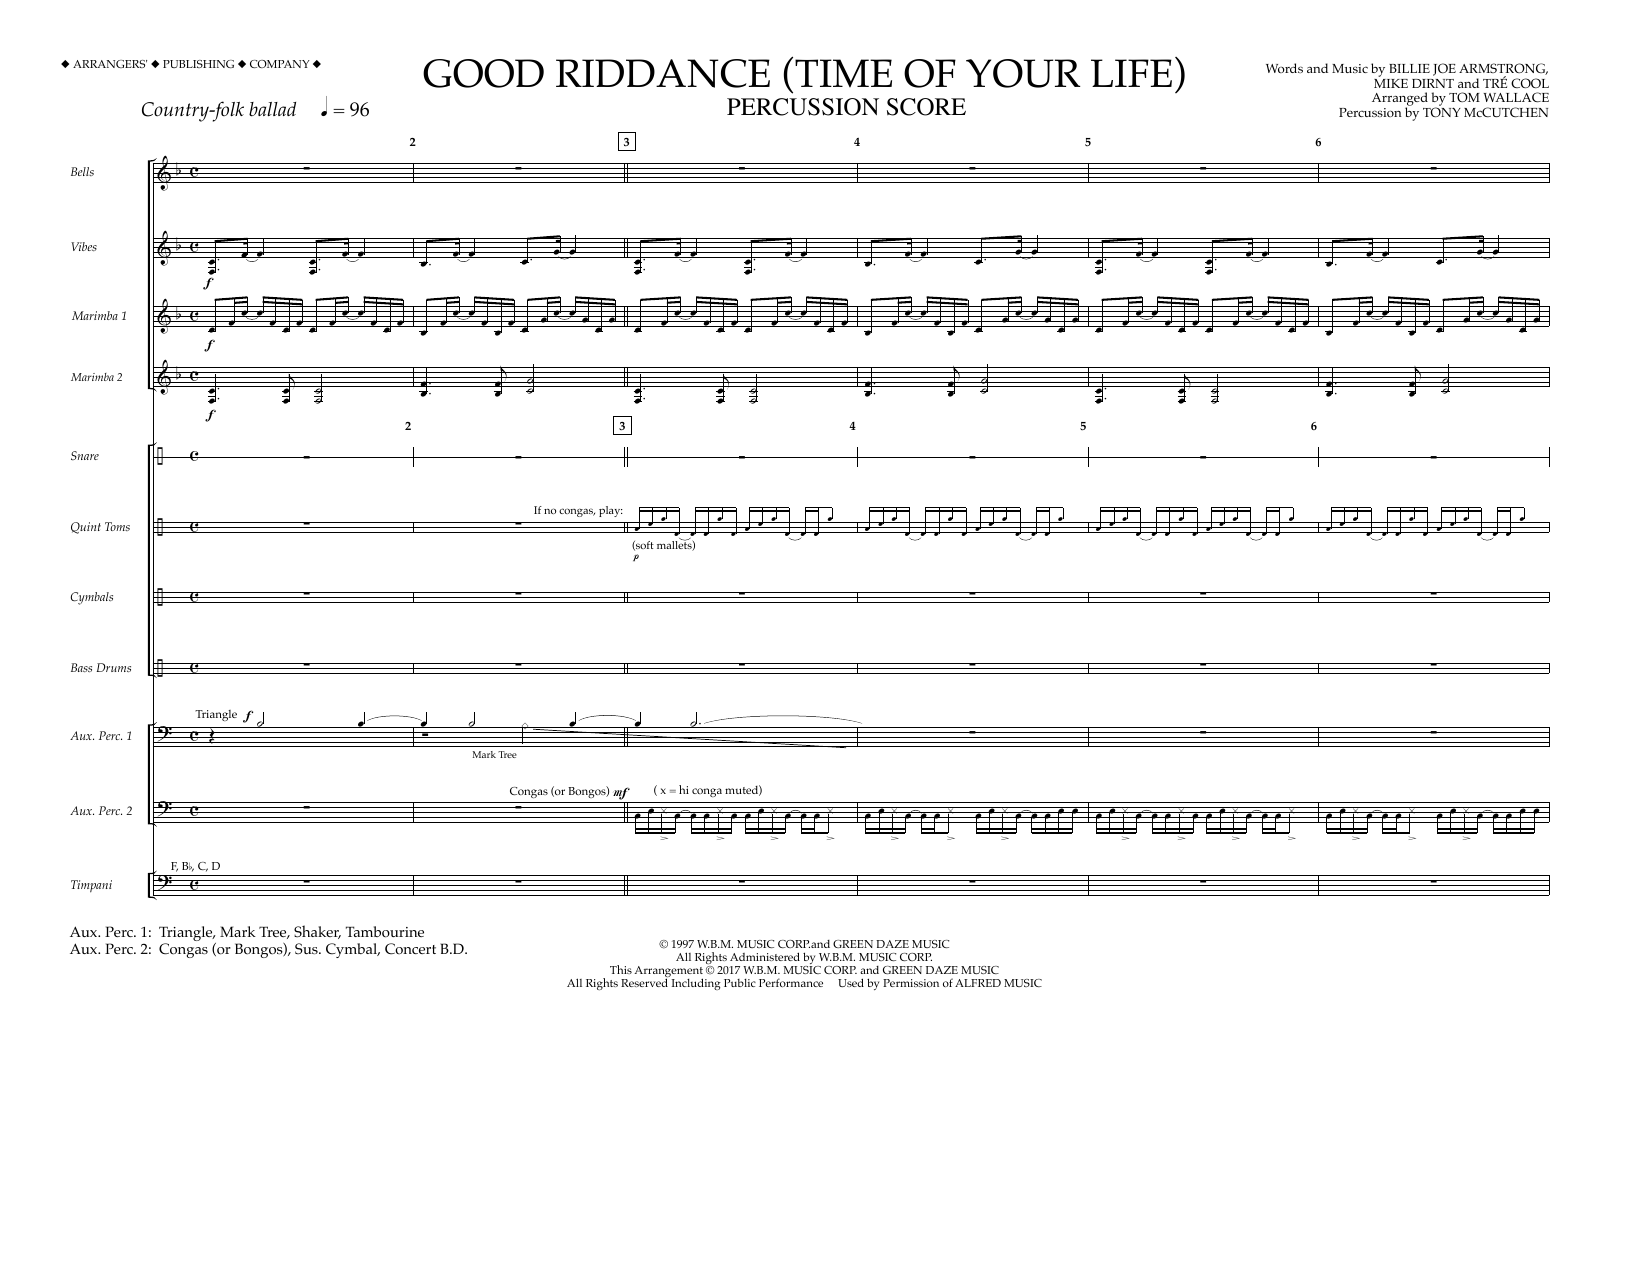 Download Tom Wallace Good Riddance (Time of Your Life) - Per Sheet Music